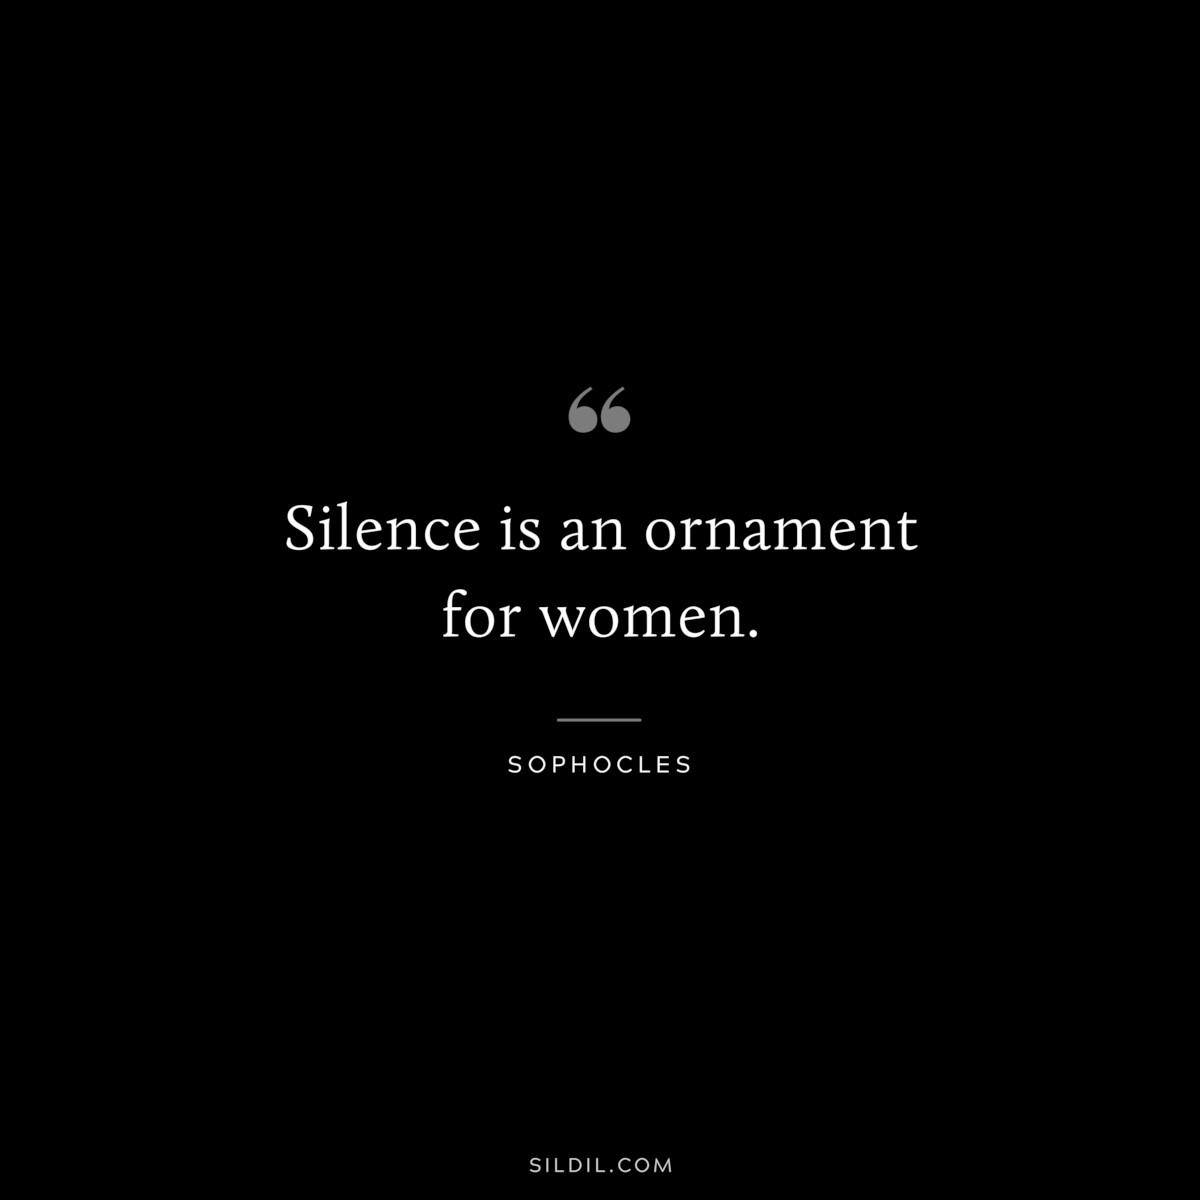 Silence is an ornament for women. ― Sophocles